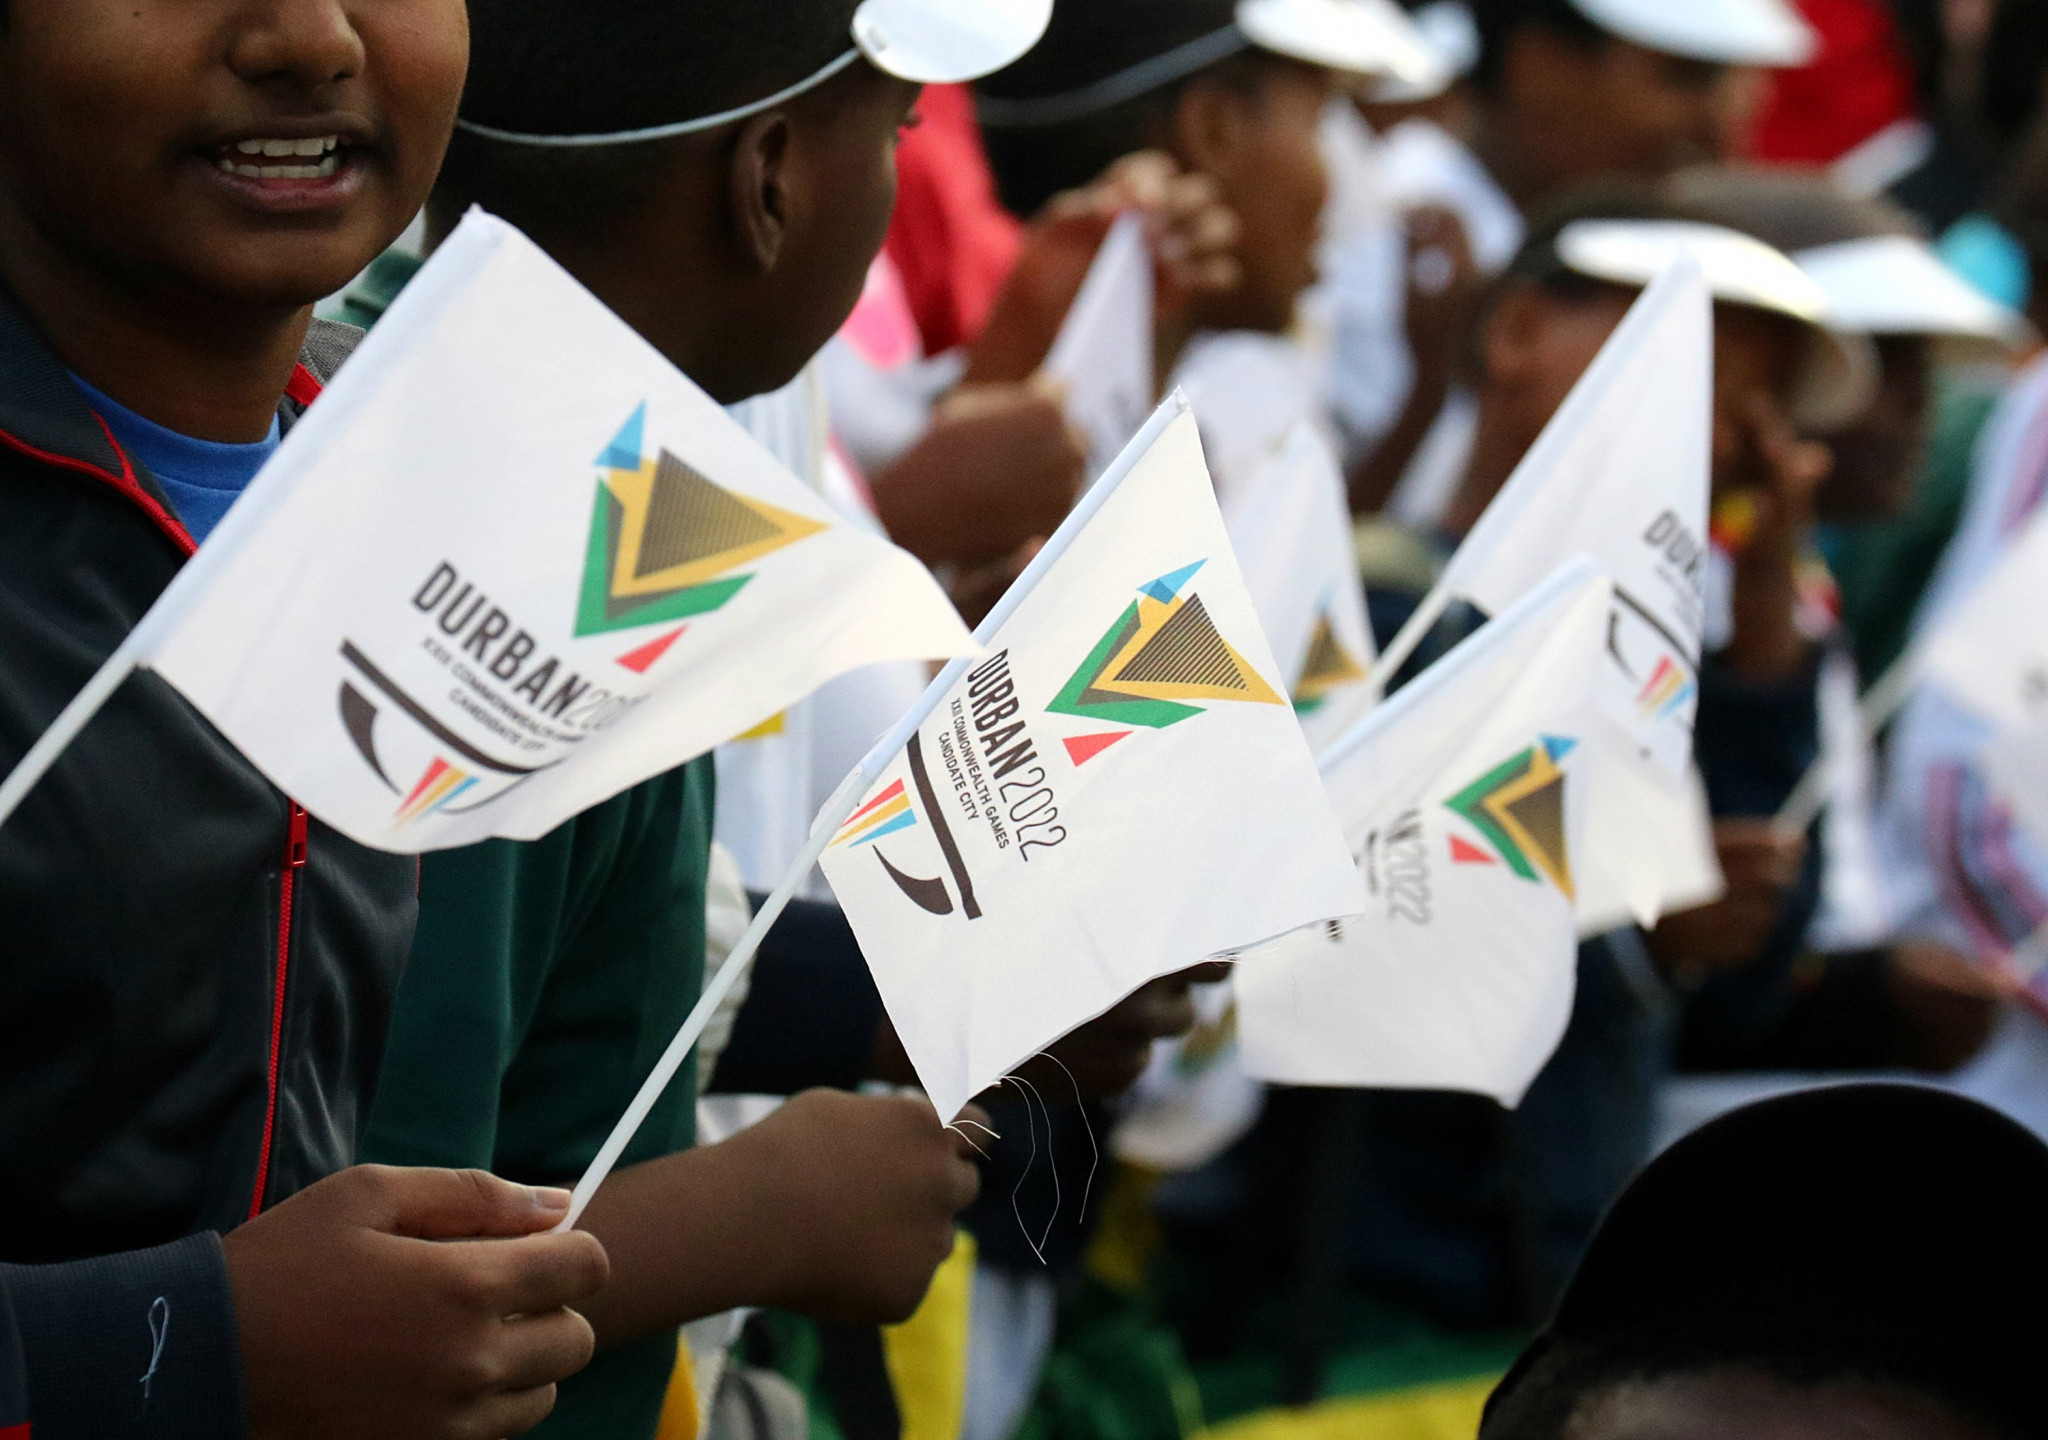 Durban was stripped of the right to host the 2022 Commonwealth Games ©Getty Images